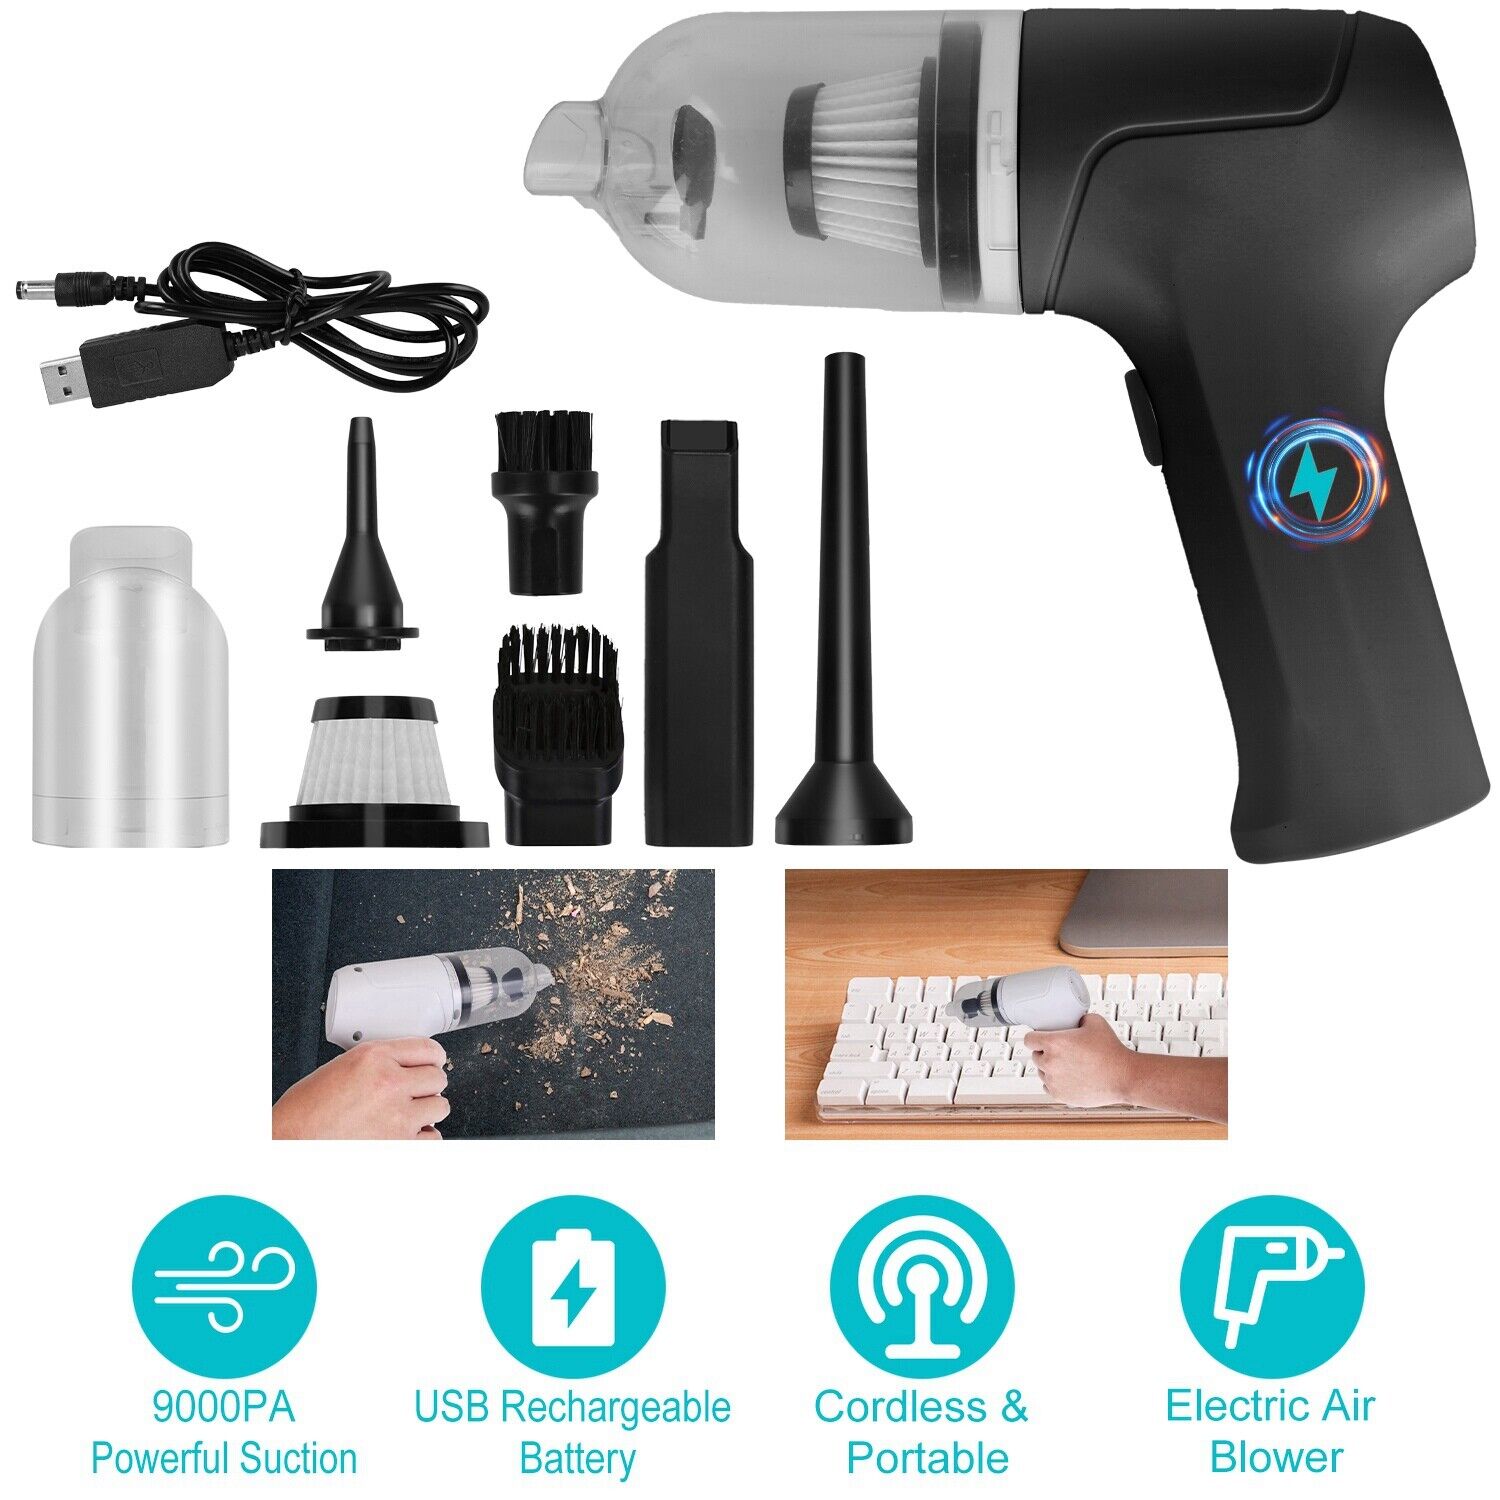 Cordless Handheld Vacuum Cleaner Portable Rechargeable Car Auto Home Wireless